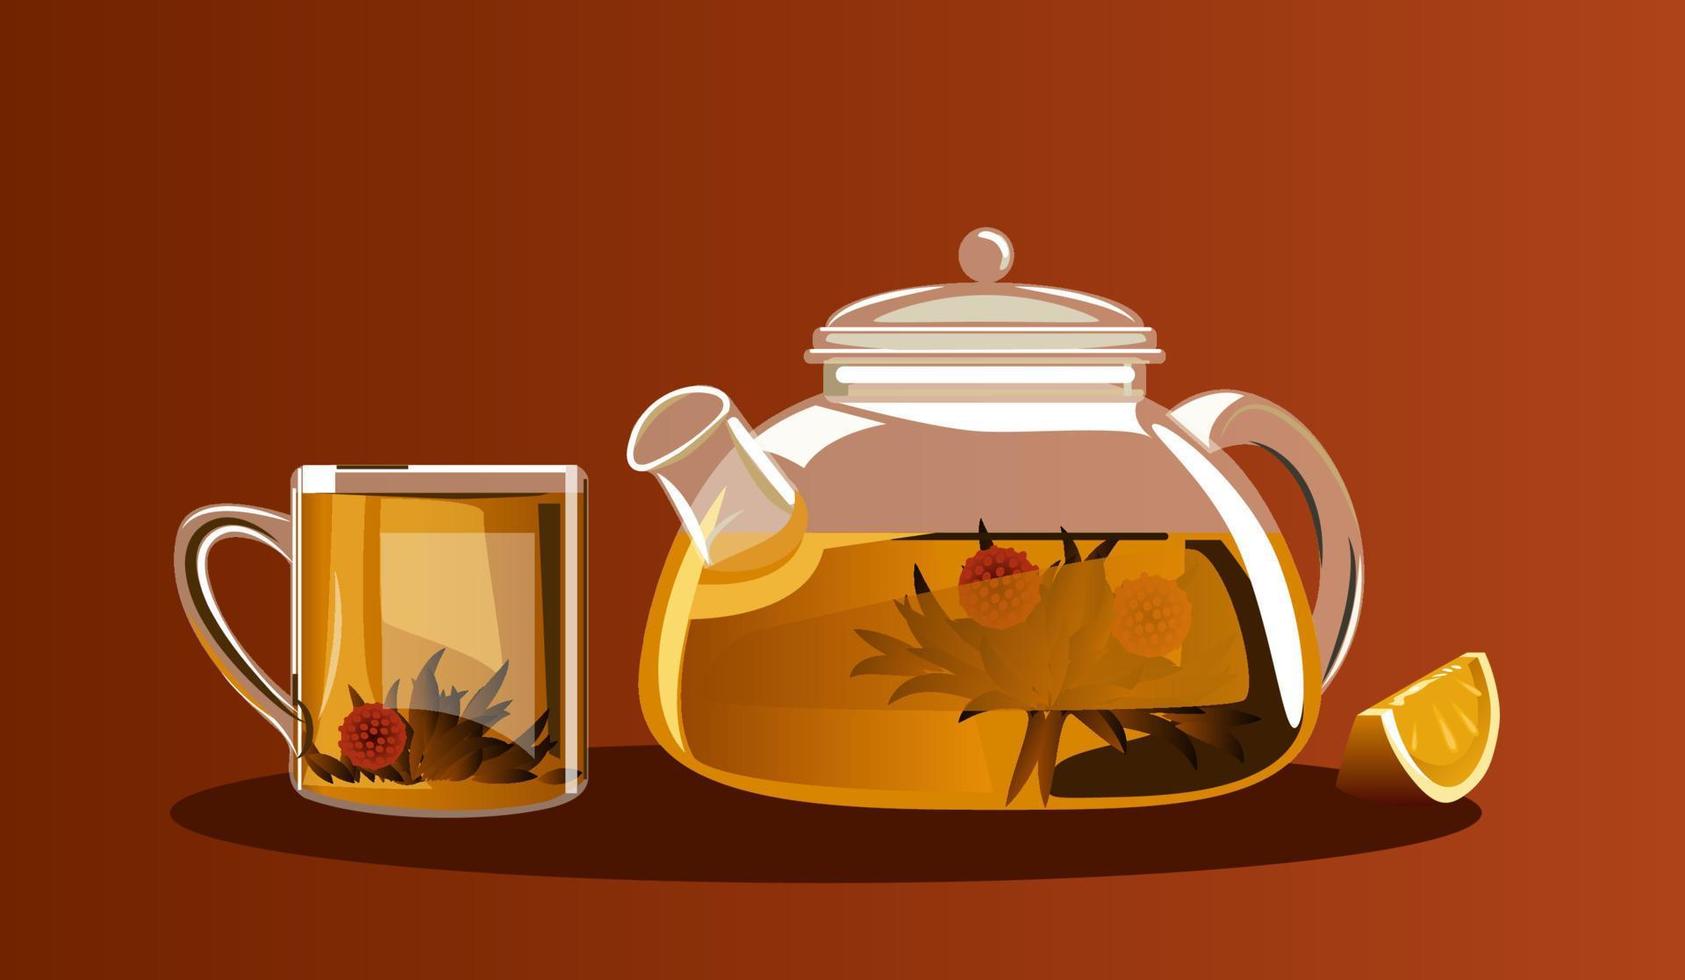 Tea with lemon, brewed tea in a kettle, tea party, brewed tea, teapot with a cup. Vector illustration.